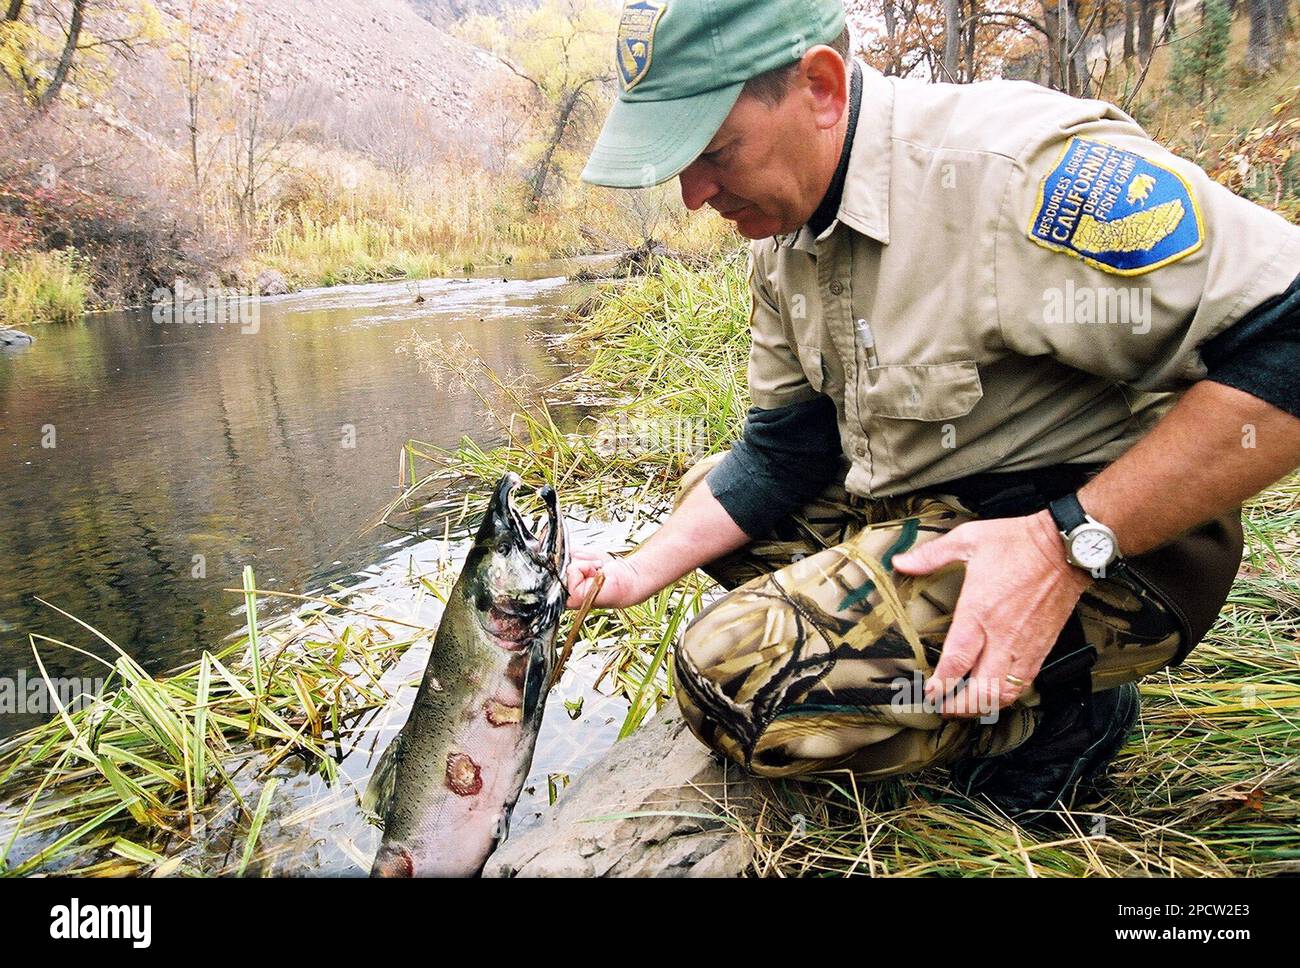 ** FILE ** California Department of Fish and Game fisheries biologist Mark Hampton examines a dead chinook salmon, Nov. 12, 2004, on Bogus Creek, a tributary of the Klamath River near Hornbrook, Calif. A federal appeals court on Thursday, July 6, 2006, upheld rules designed to protect Klamath River fall chinook salmon, rejecting a challenge brought by coastal fishermen whose business has been practically shut down this year. (AP Photo/Jeff Barnard) Banque D'Images